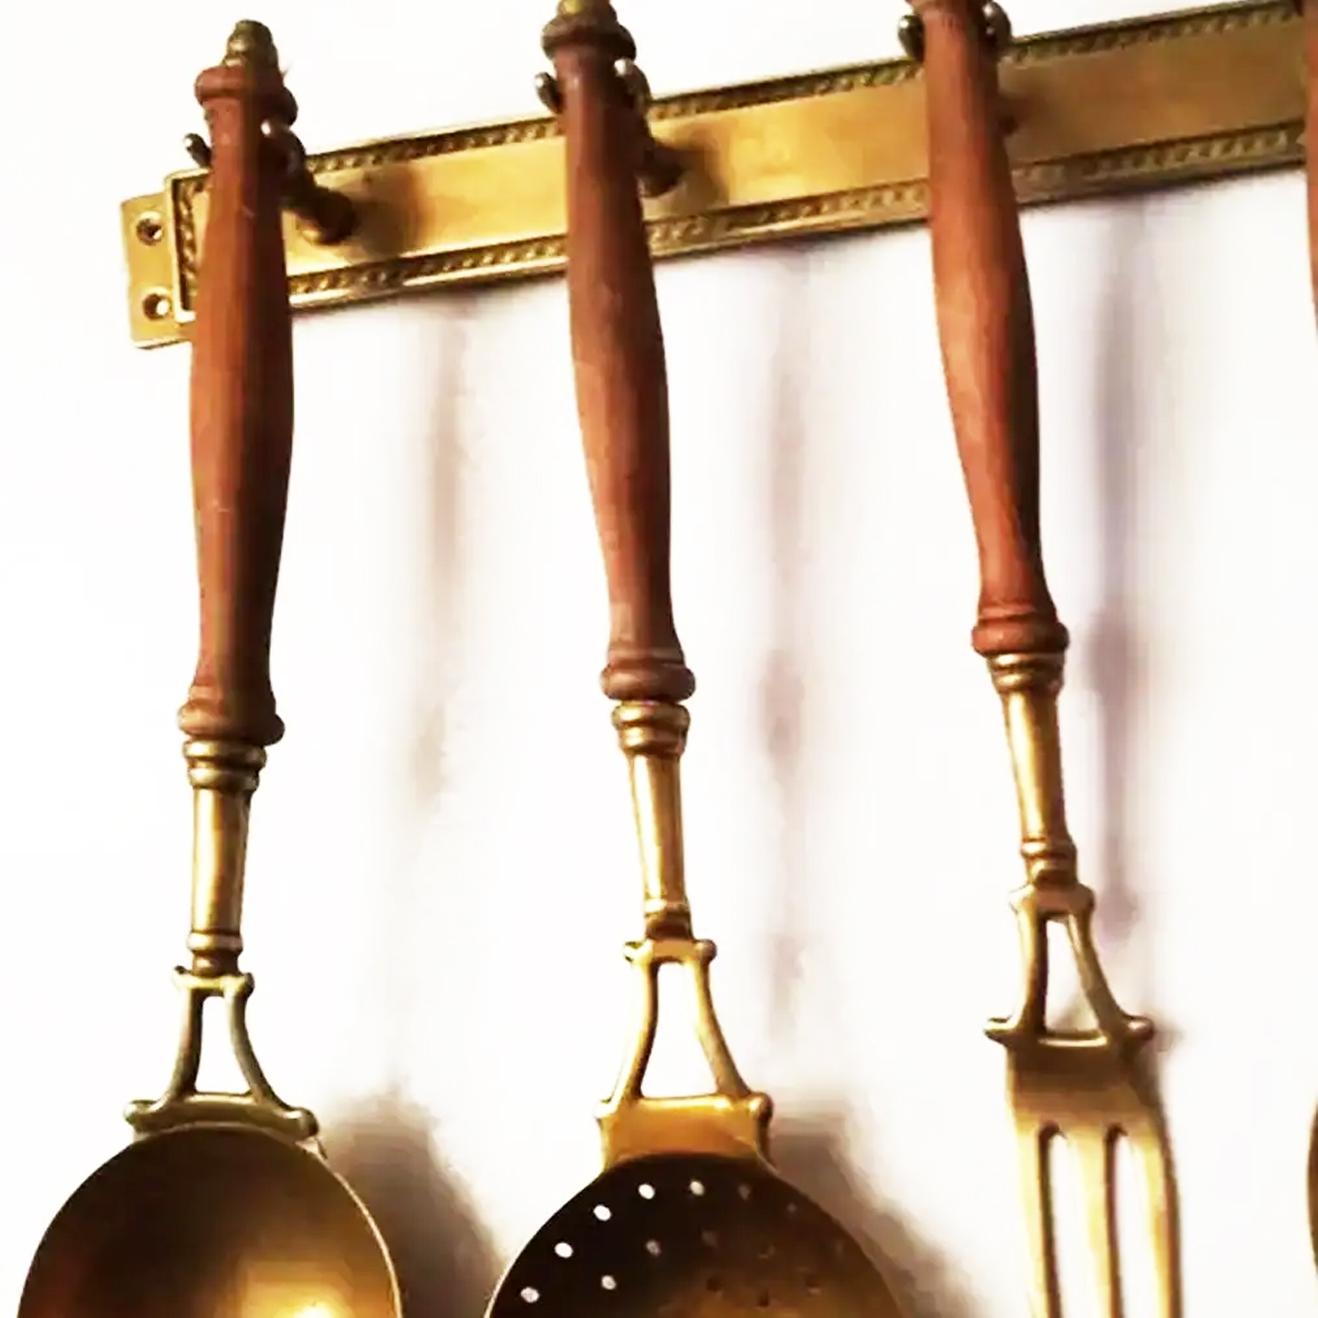 Old kitchen tools or utensils made of brass and wood hanging from a hanging bar. Old kitchen appliances,

Early 20th century

Saucepan fork palette and serving pot

This set of brass utensils is ideal to decorate a kitchen of any style, not